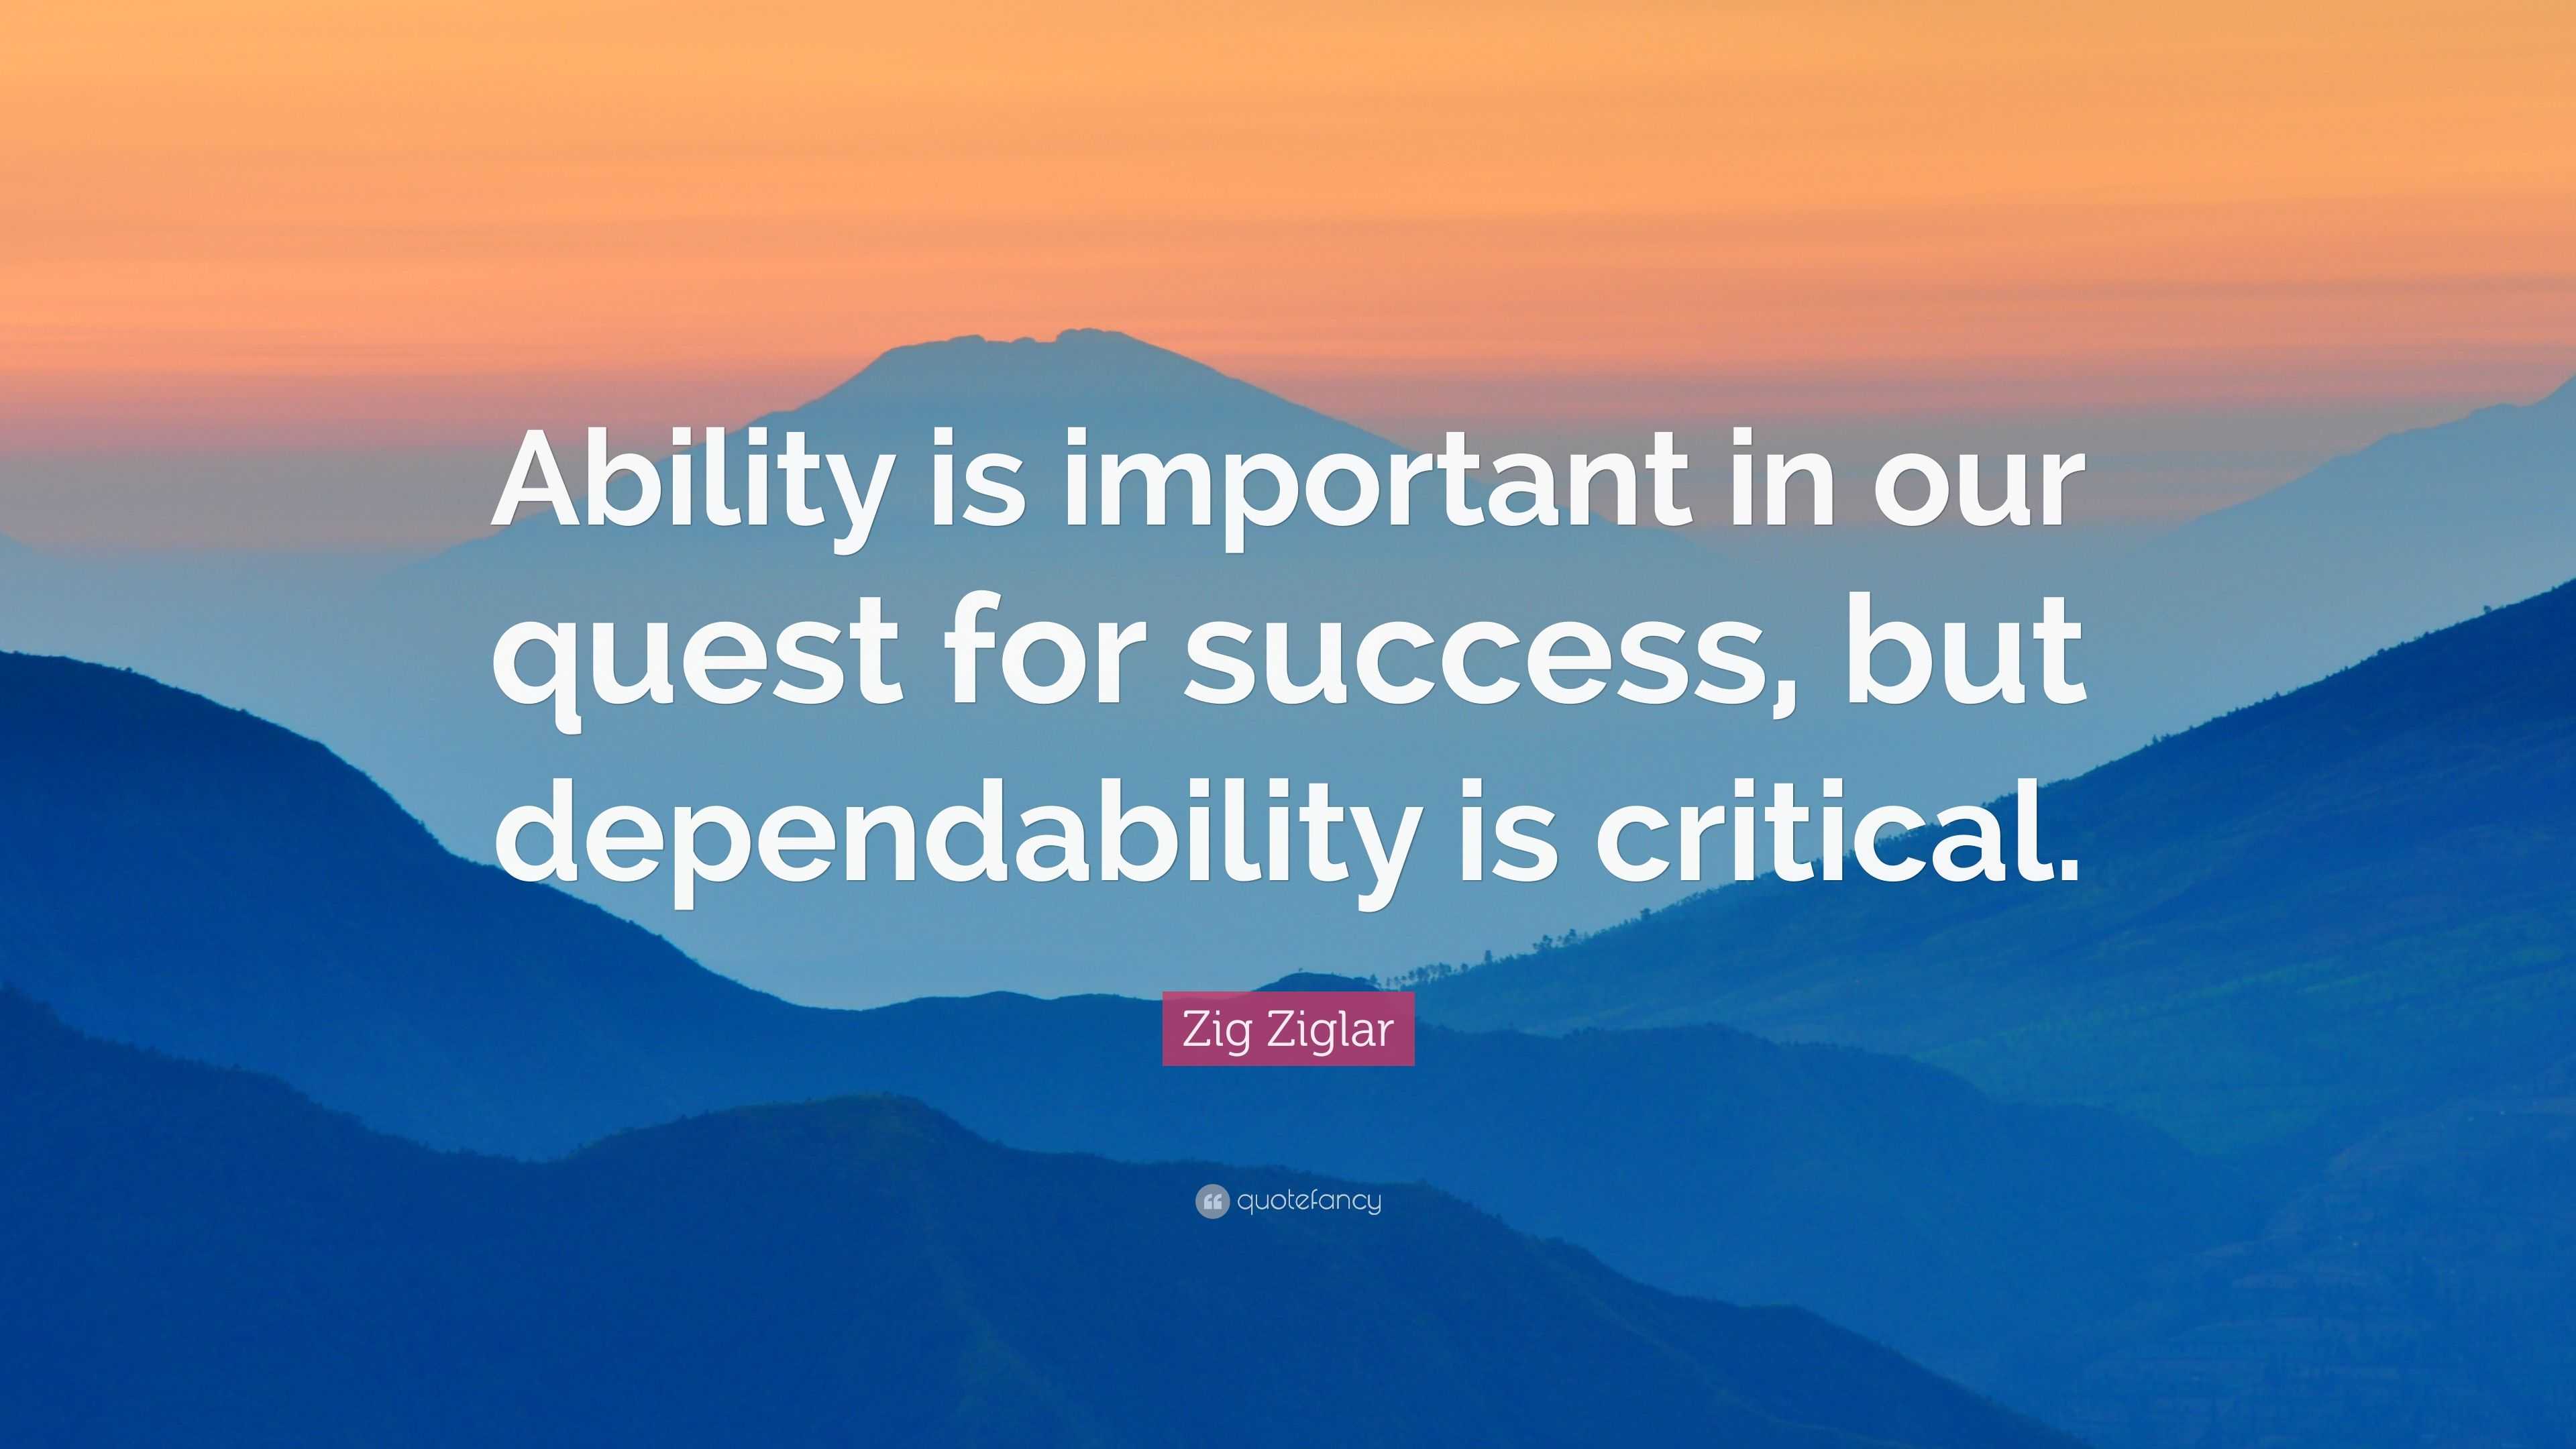 Zig Ziglar Quote: "Ability is important in our quest for success, but dependability is critical."